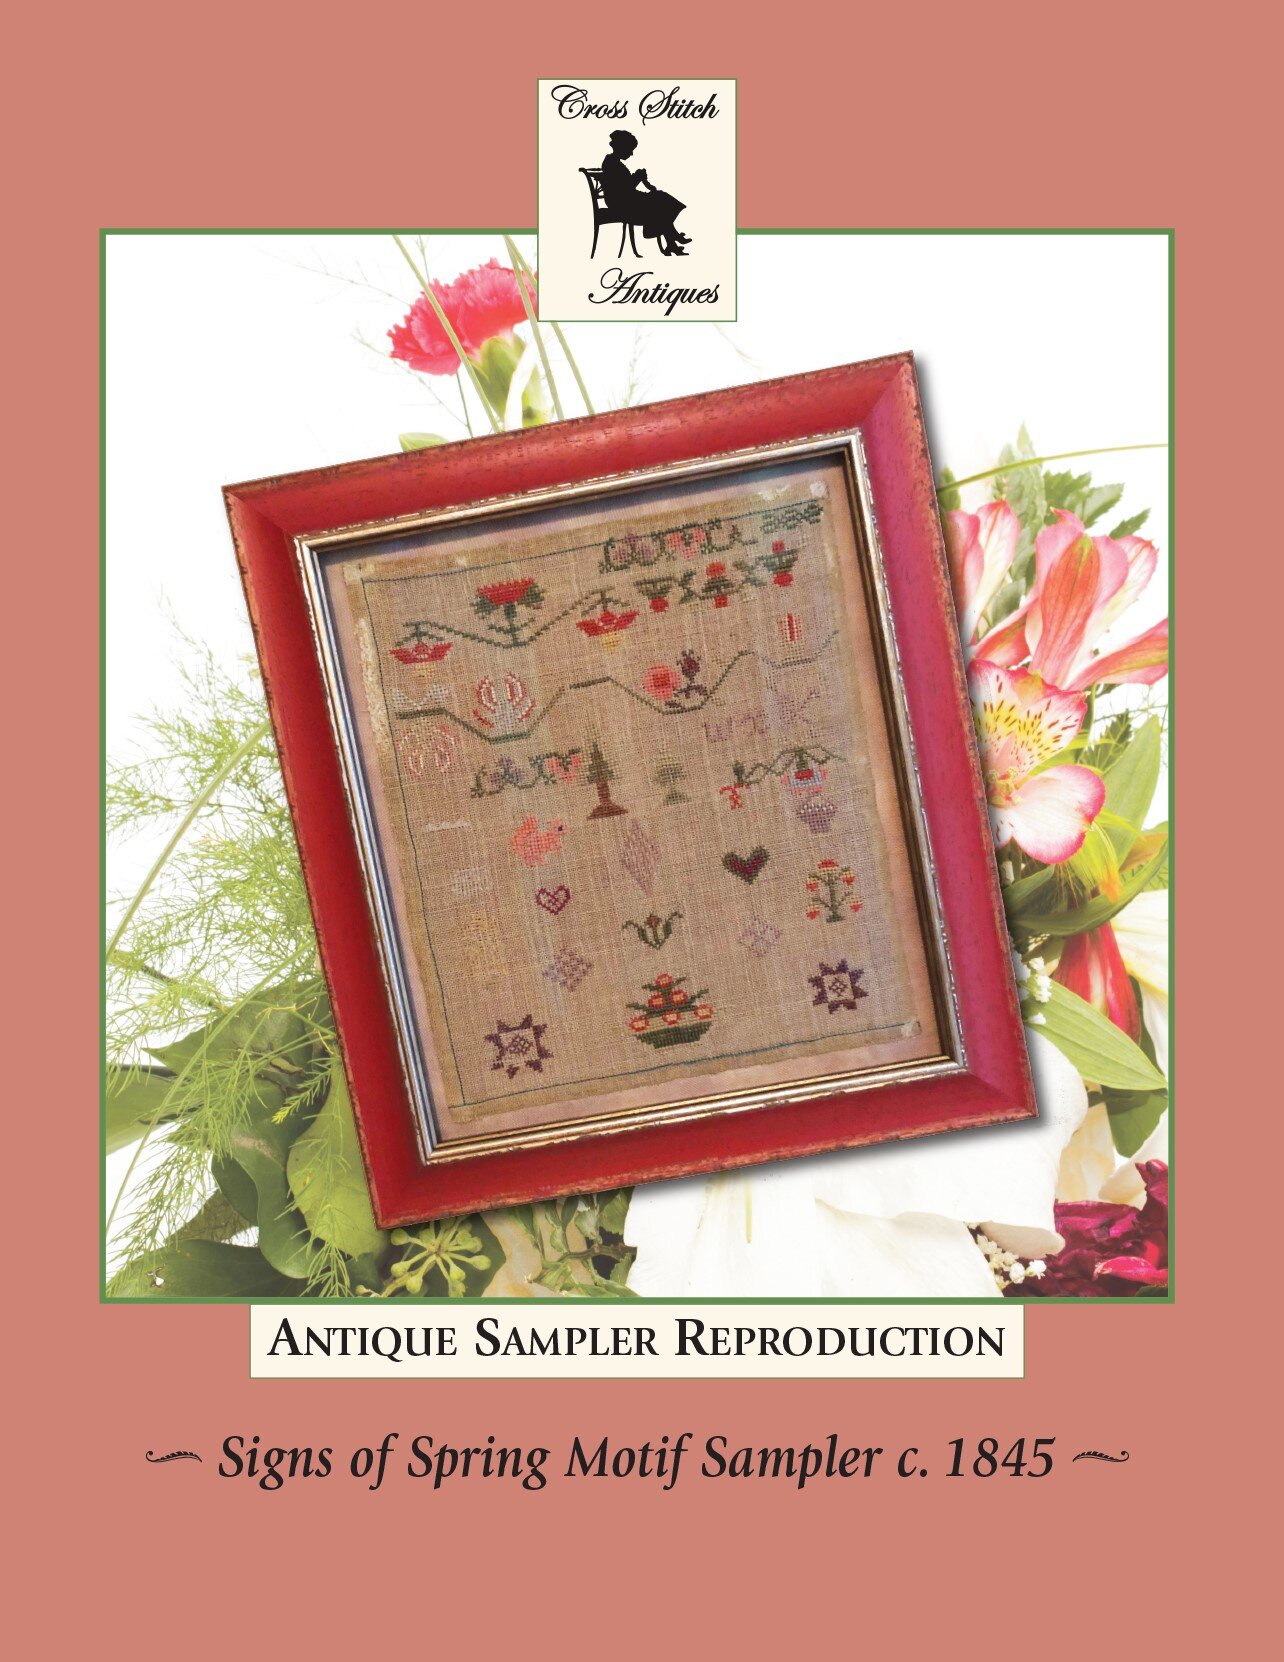 Ashton School 1846 Antique Sampler of the Month Series by Cross Stitch Antiques MONTH 4 Mary Green